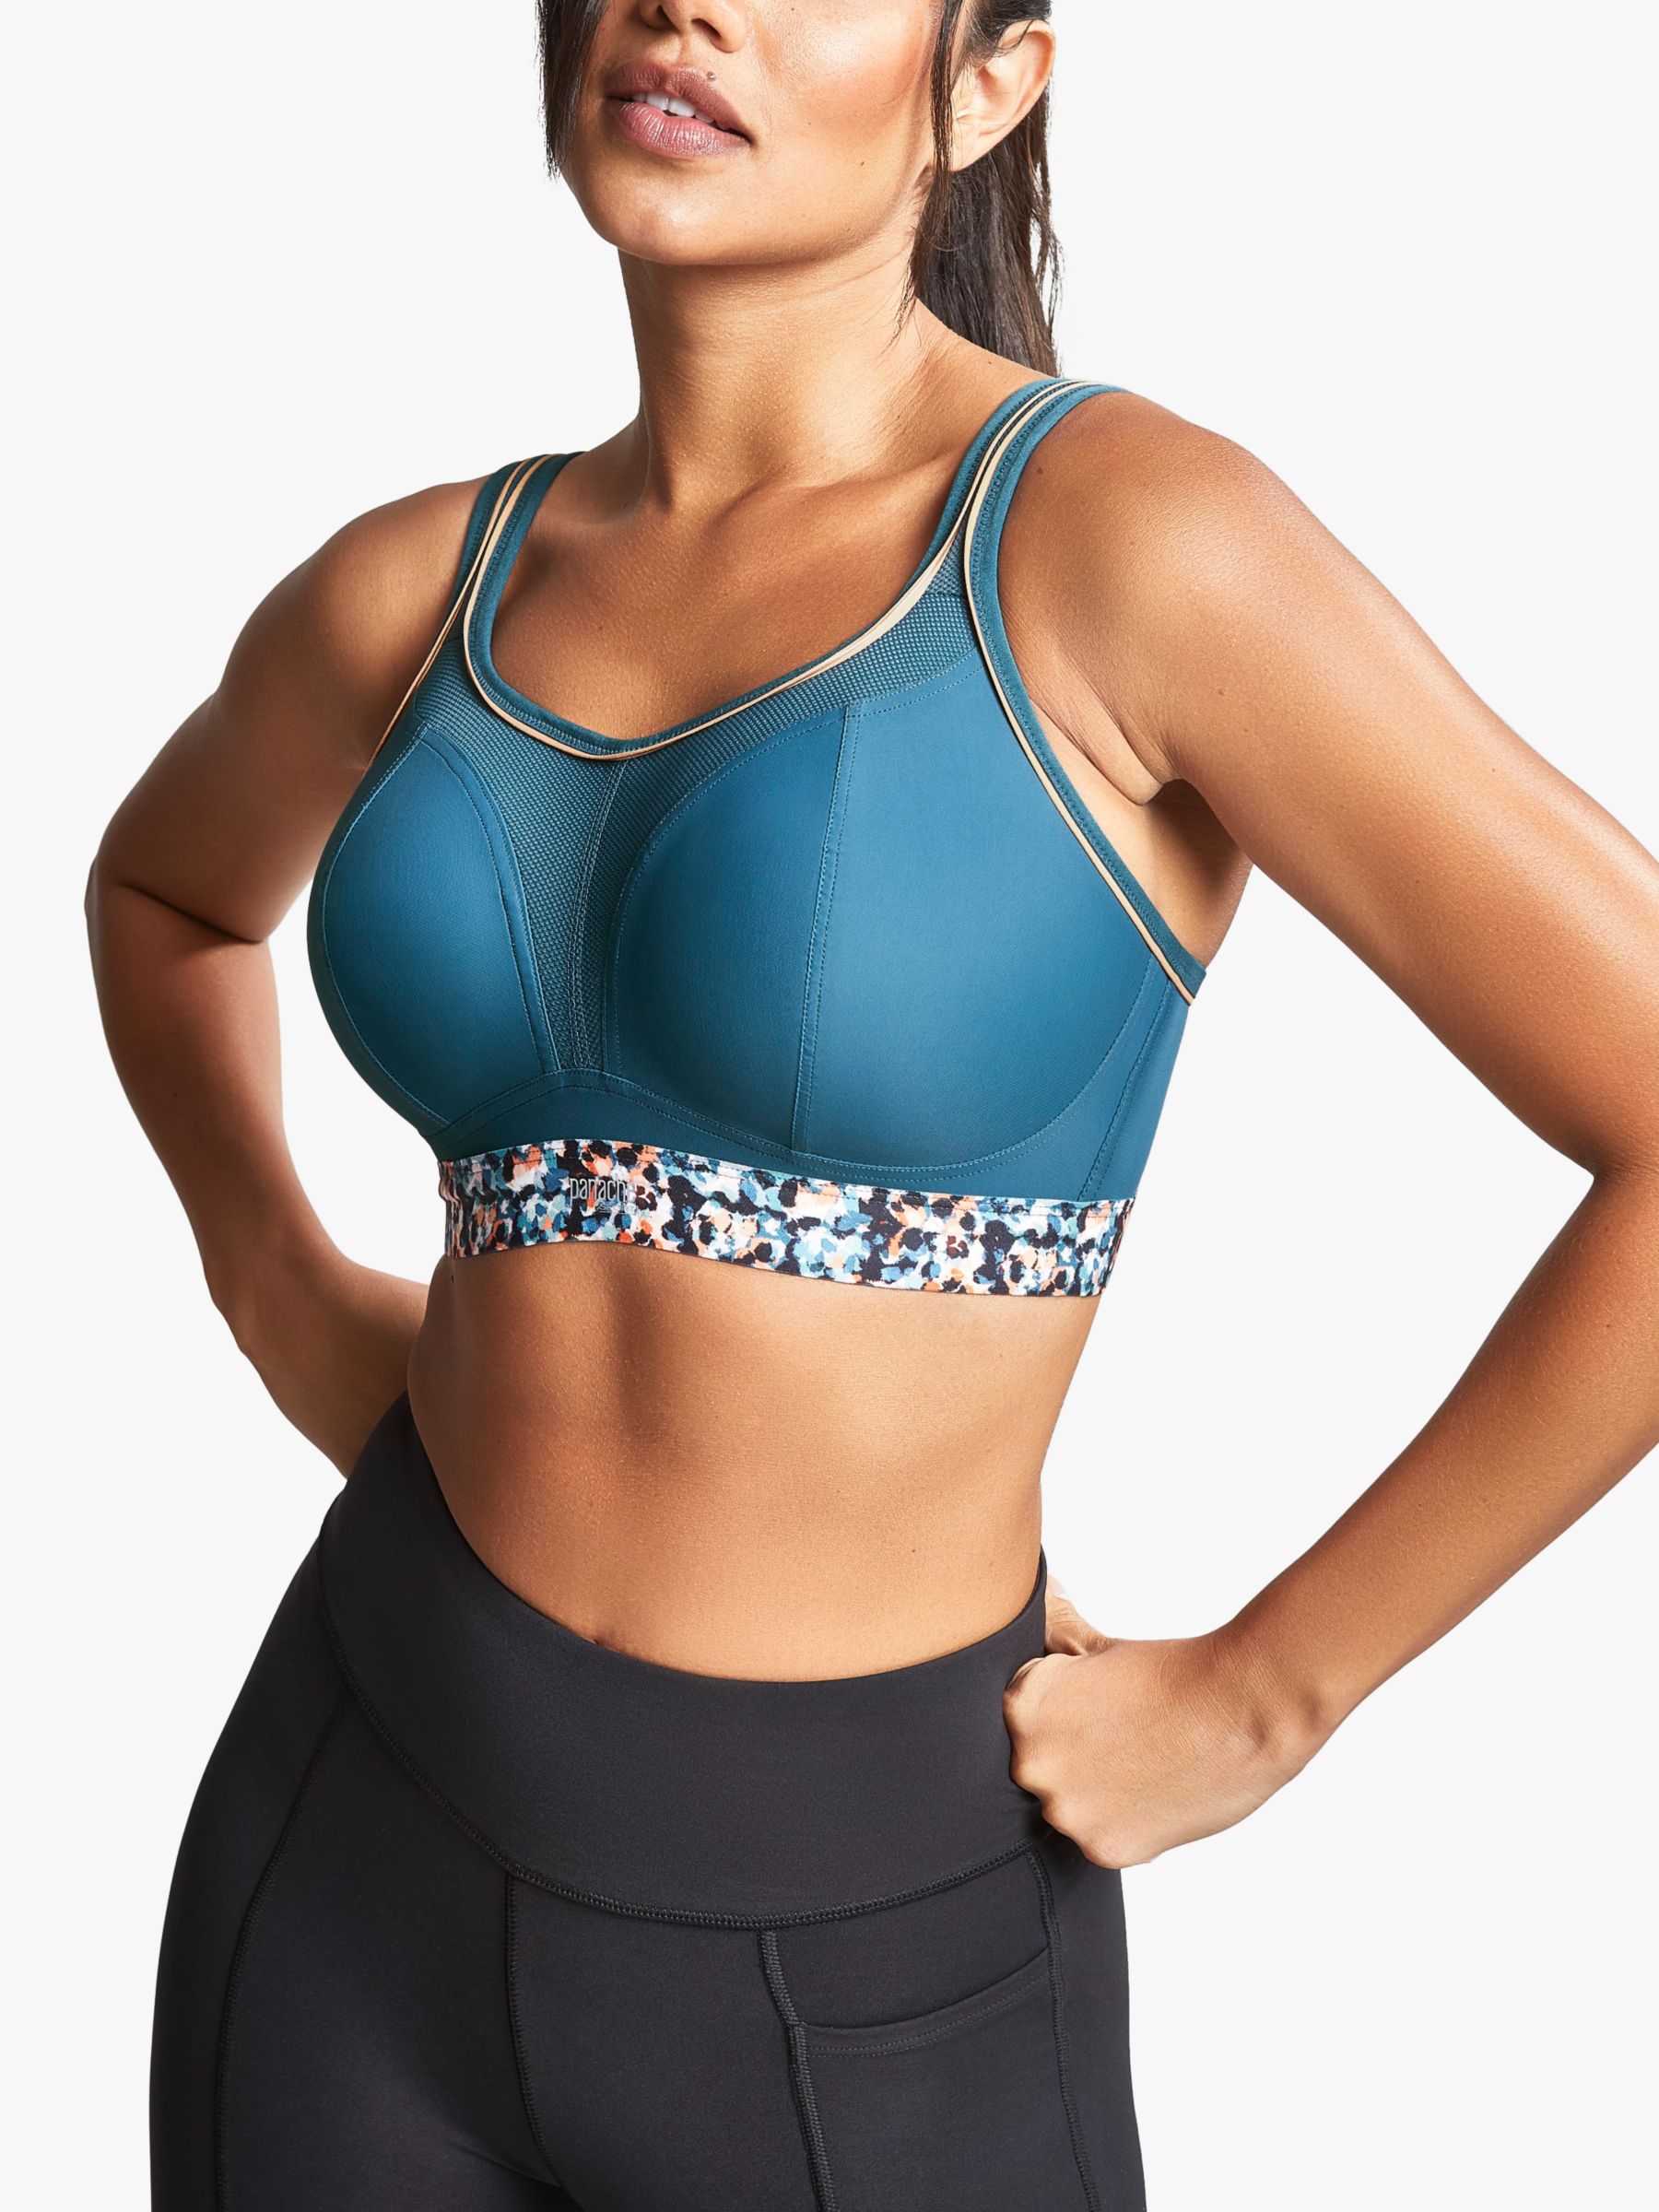 Panache Abstract Animal Print Non Wired Sports Bra, Blue/Multi at John Lewis  & Partners